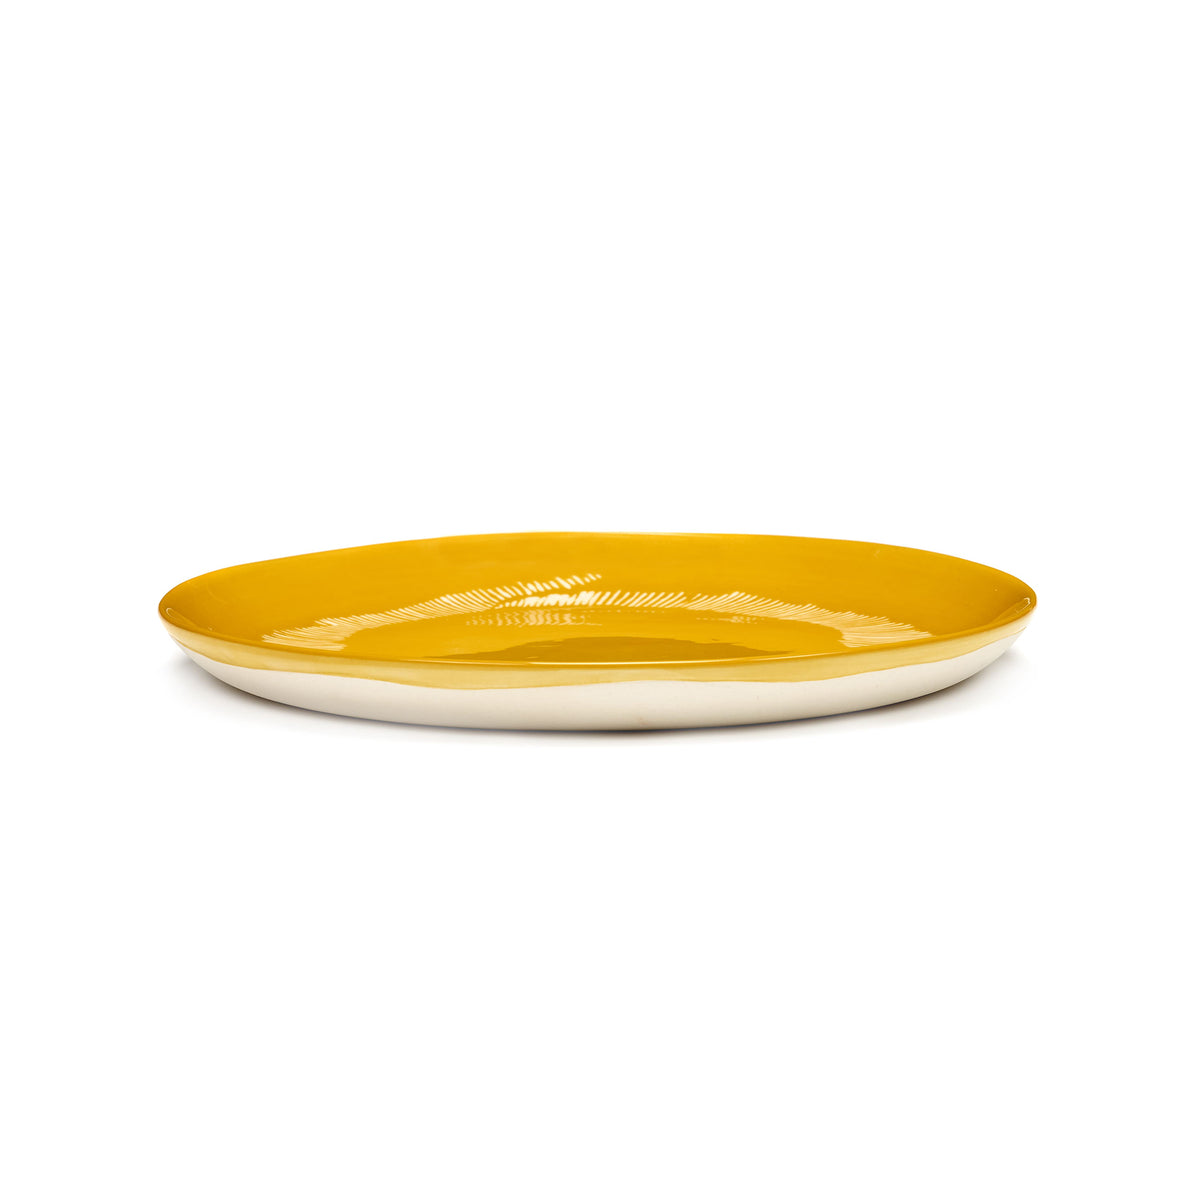 Sunny Yellow Plate with White Stripes - M